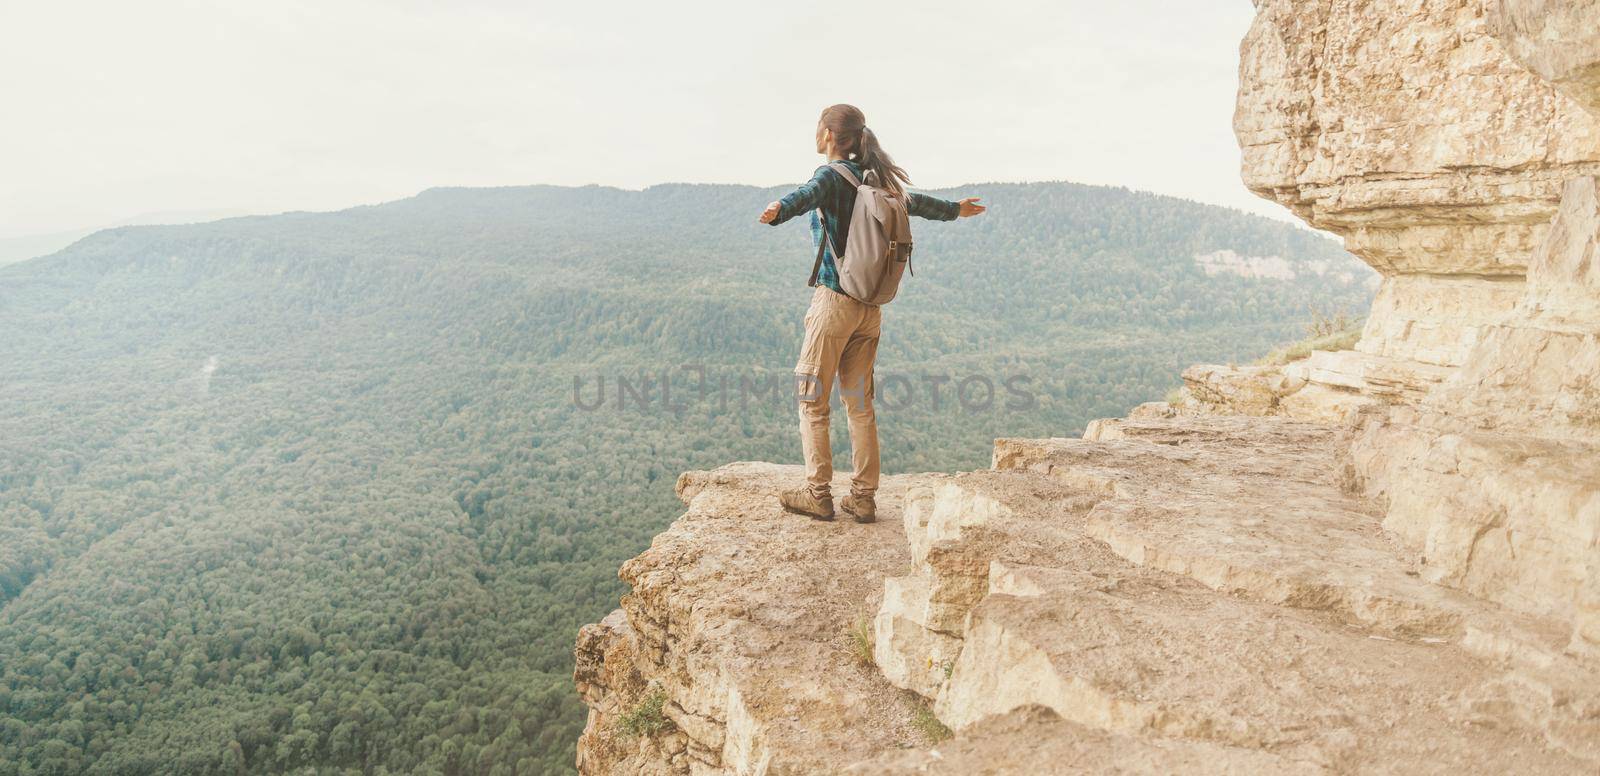 Backpacker young woman standing on cliff Eagle shelf with raised arms and enjoying view of nature, Mezmay, Krasnodar region, Russia